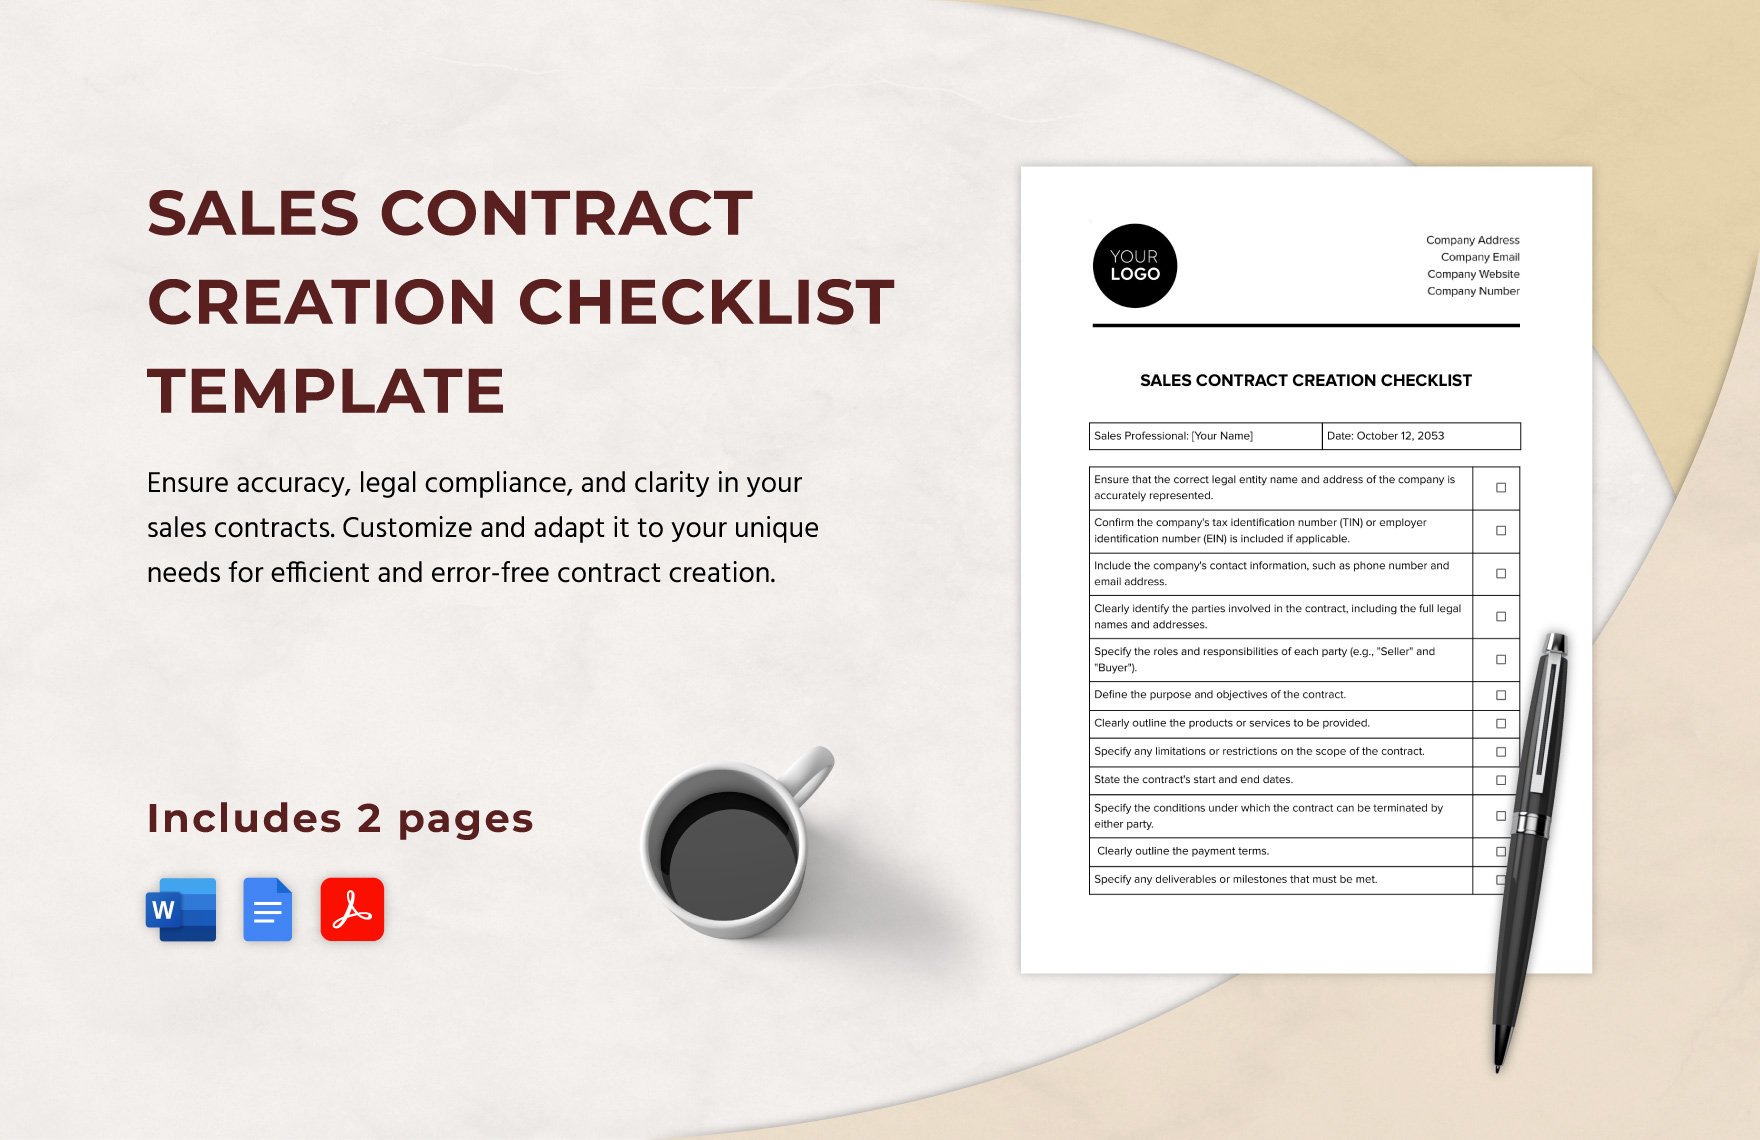 Sales Contract Creation Checklist Template in Word, Google Docs, PDF